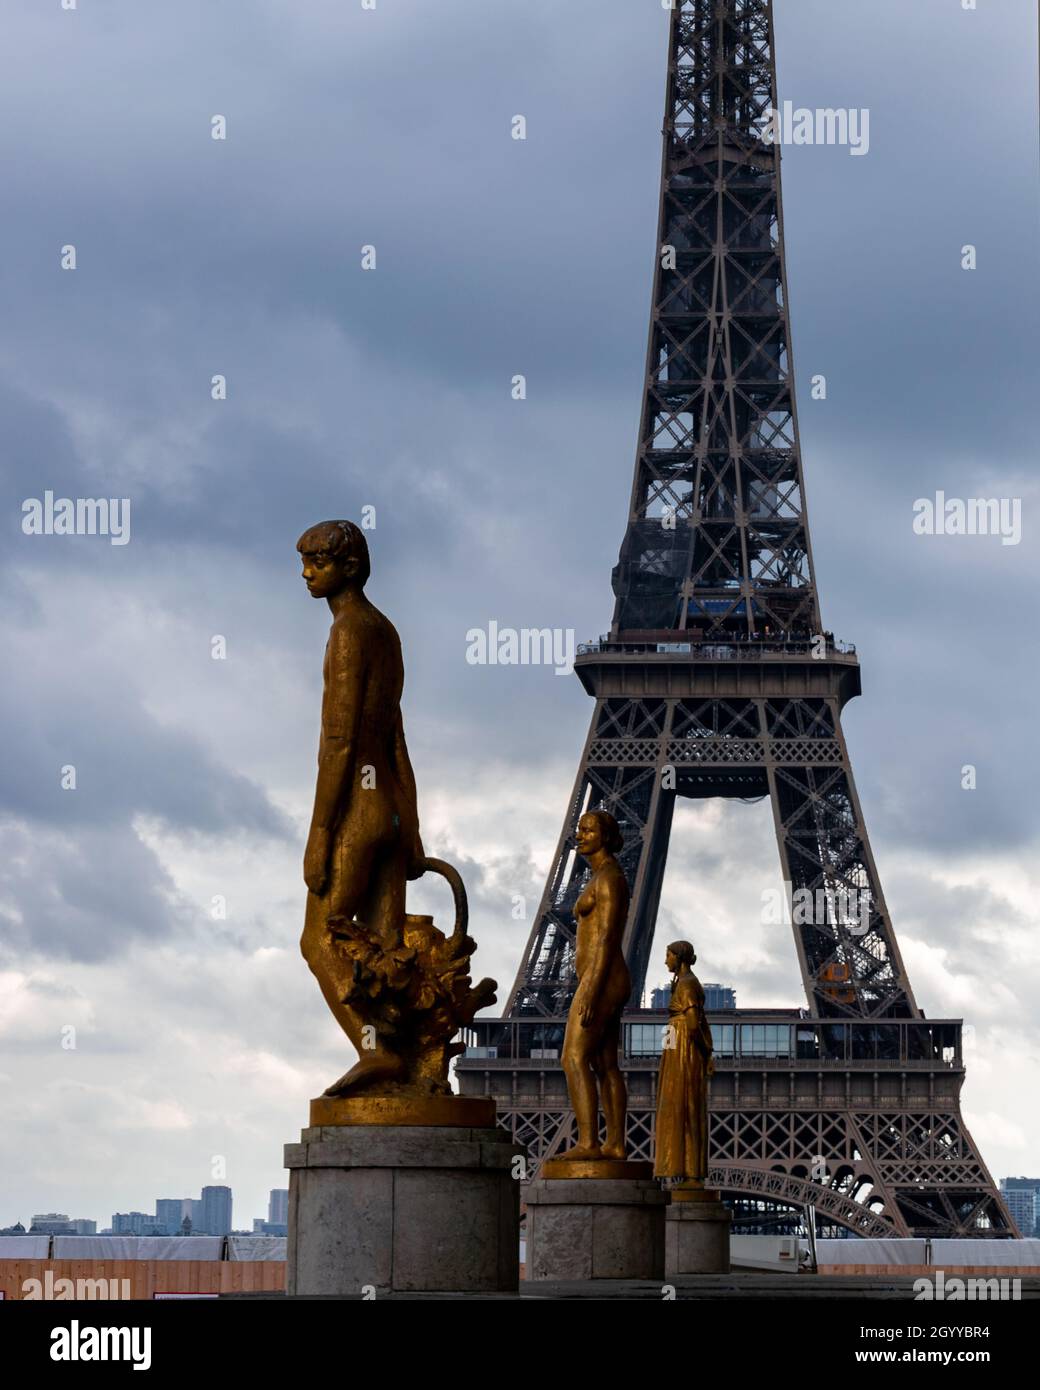 The statues of Trocadero square, with the Eiffel tower in the background, Paris France Stock Photo